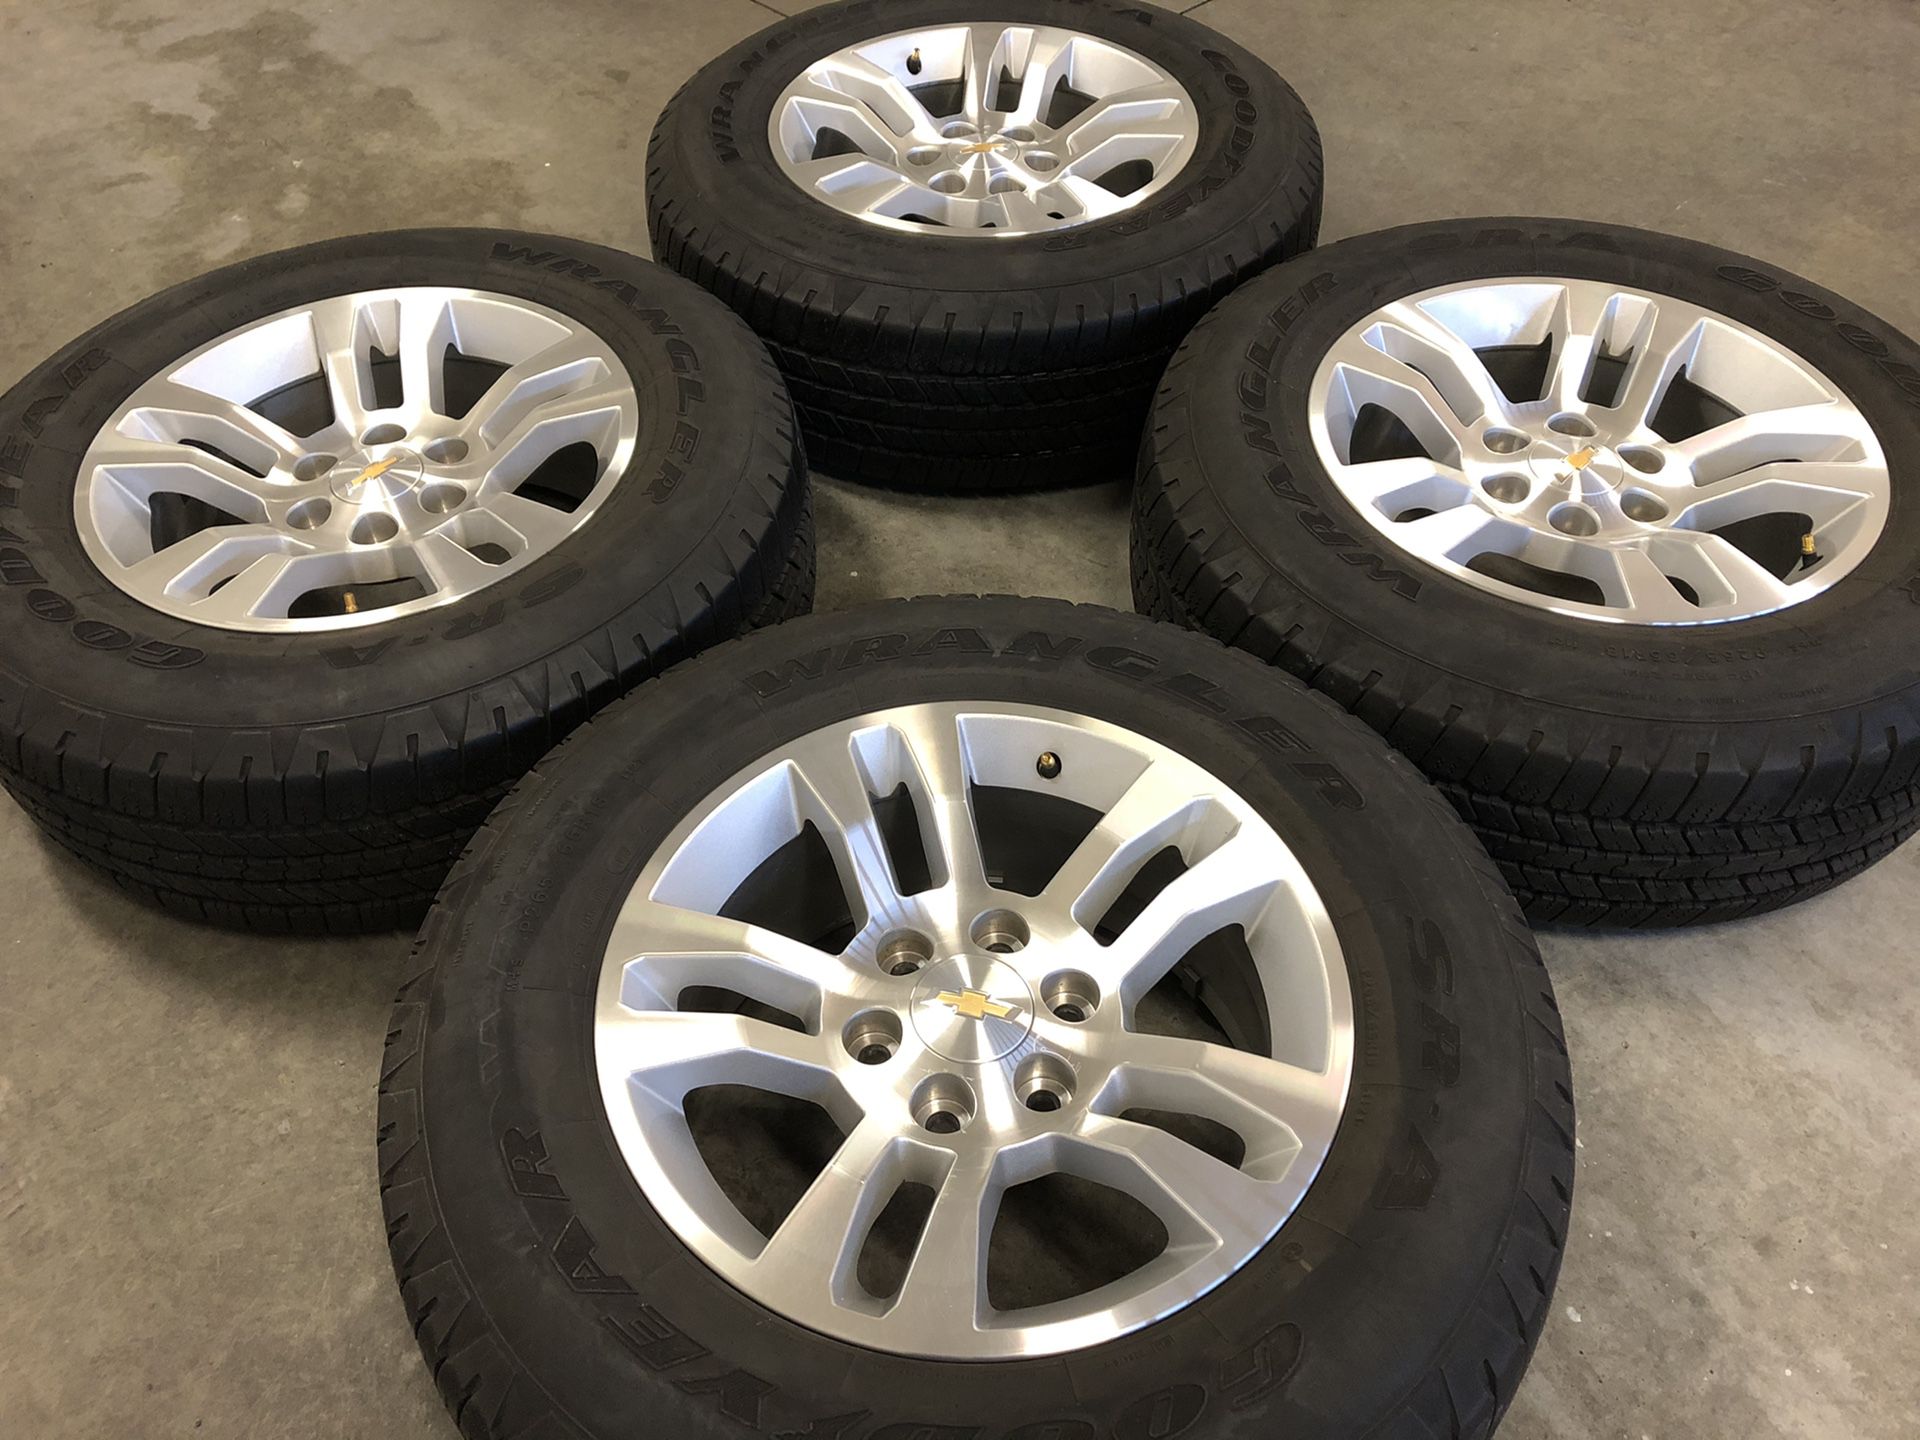 2014 Chevy Silverado LT OEM wheels with Goodyear Wrangler SR-A 265/65R18  tires 10/32 tread set of 4 with lug nuts for Sale in Lakewood, WA - OfferUp